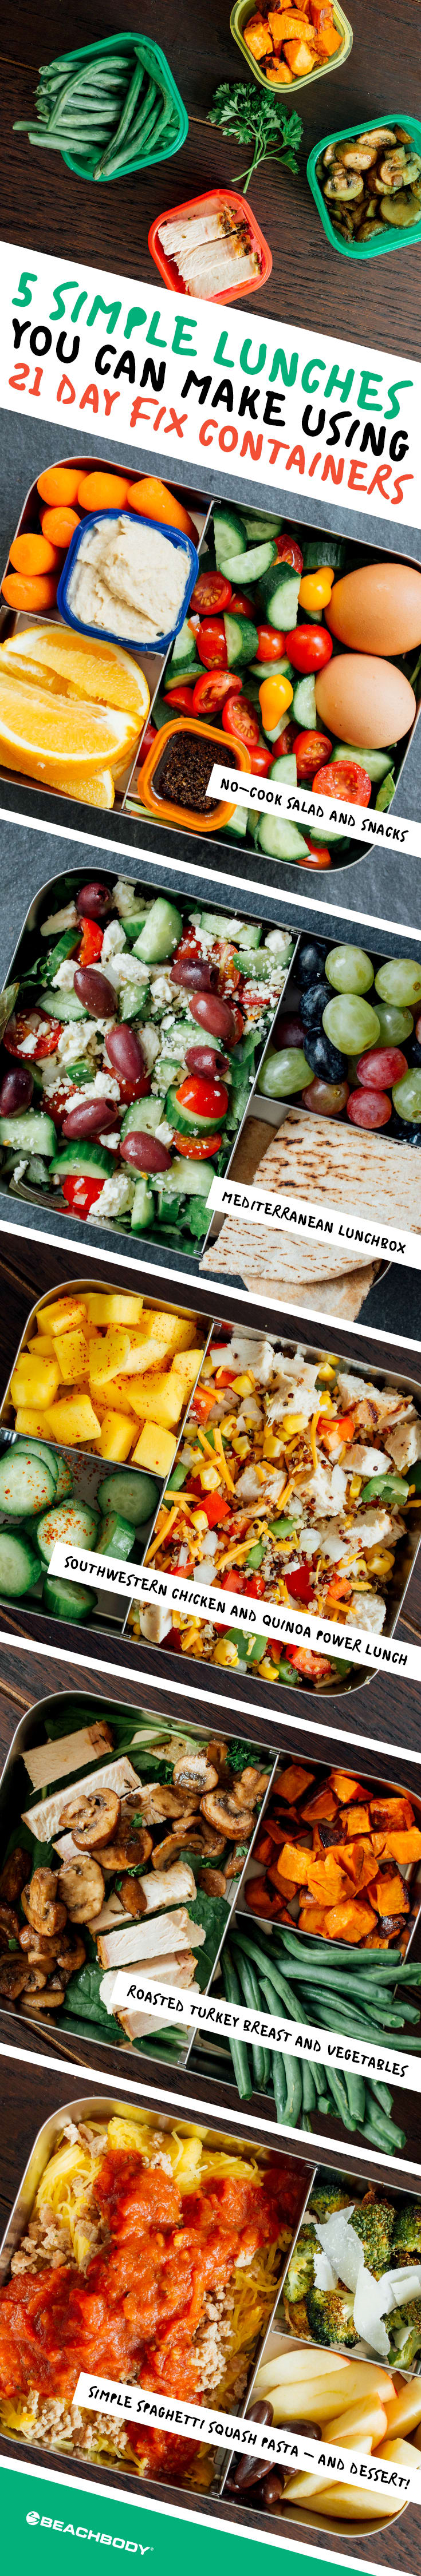 5 Simple Lunches You Can Make Using Portion Fix Containers (21 Day Fix Containers)